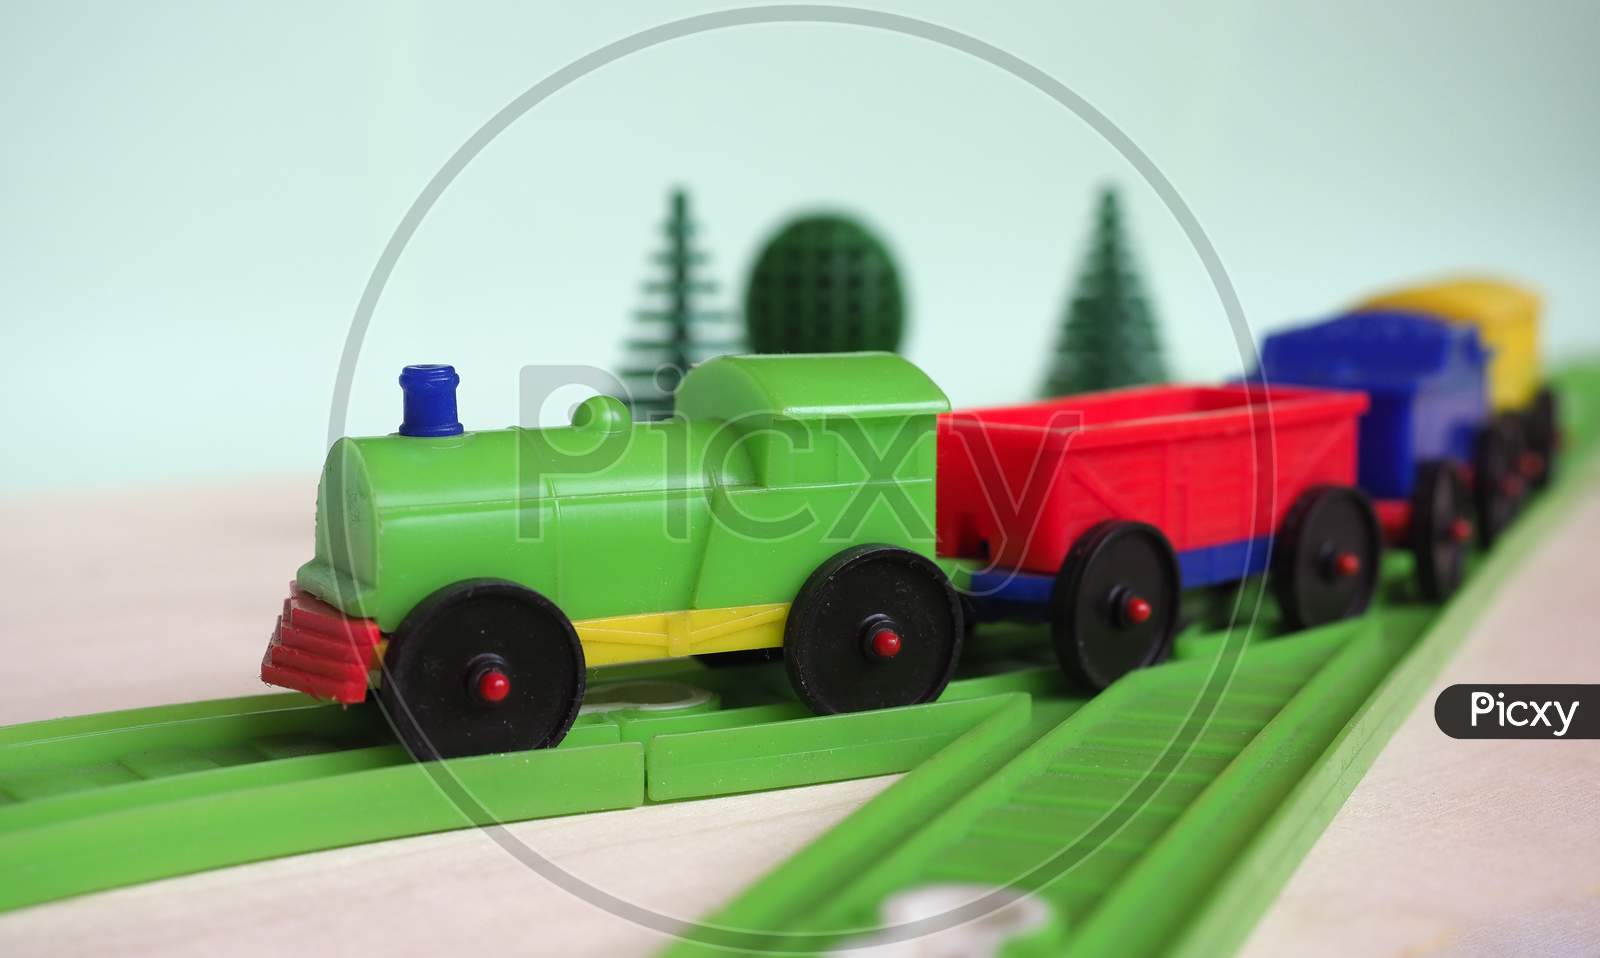 Toy Train And Railway